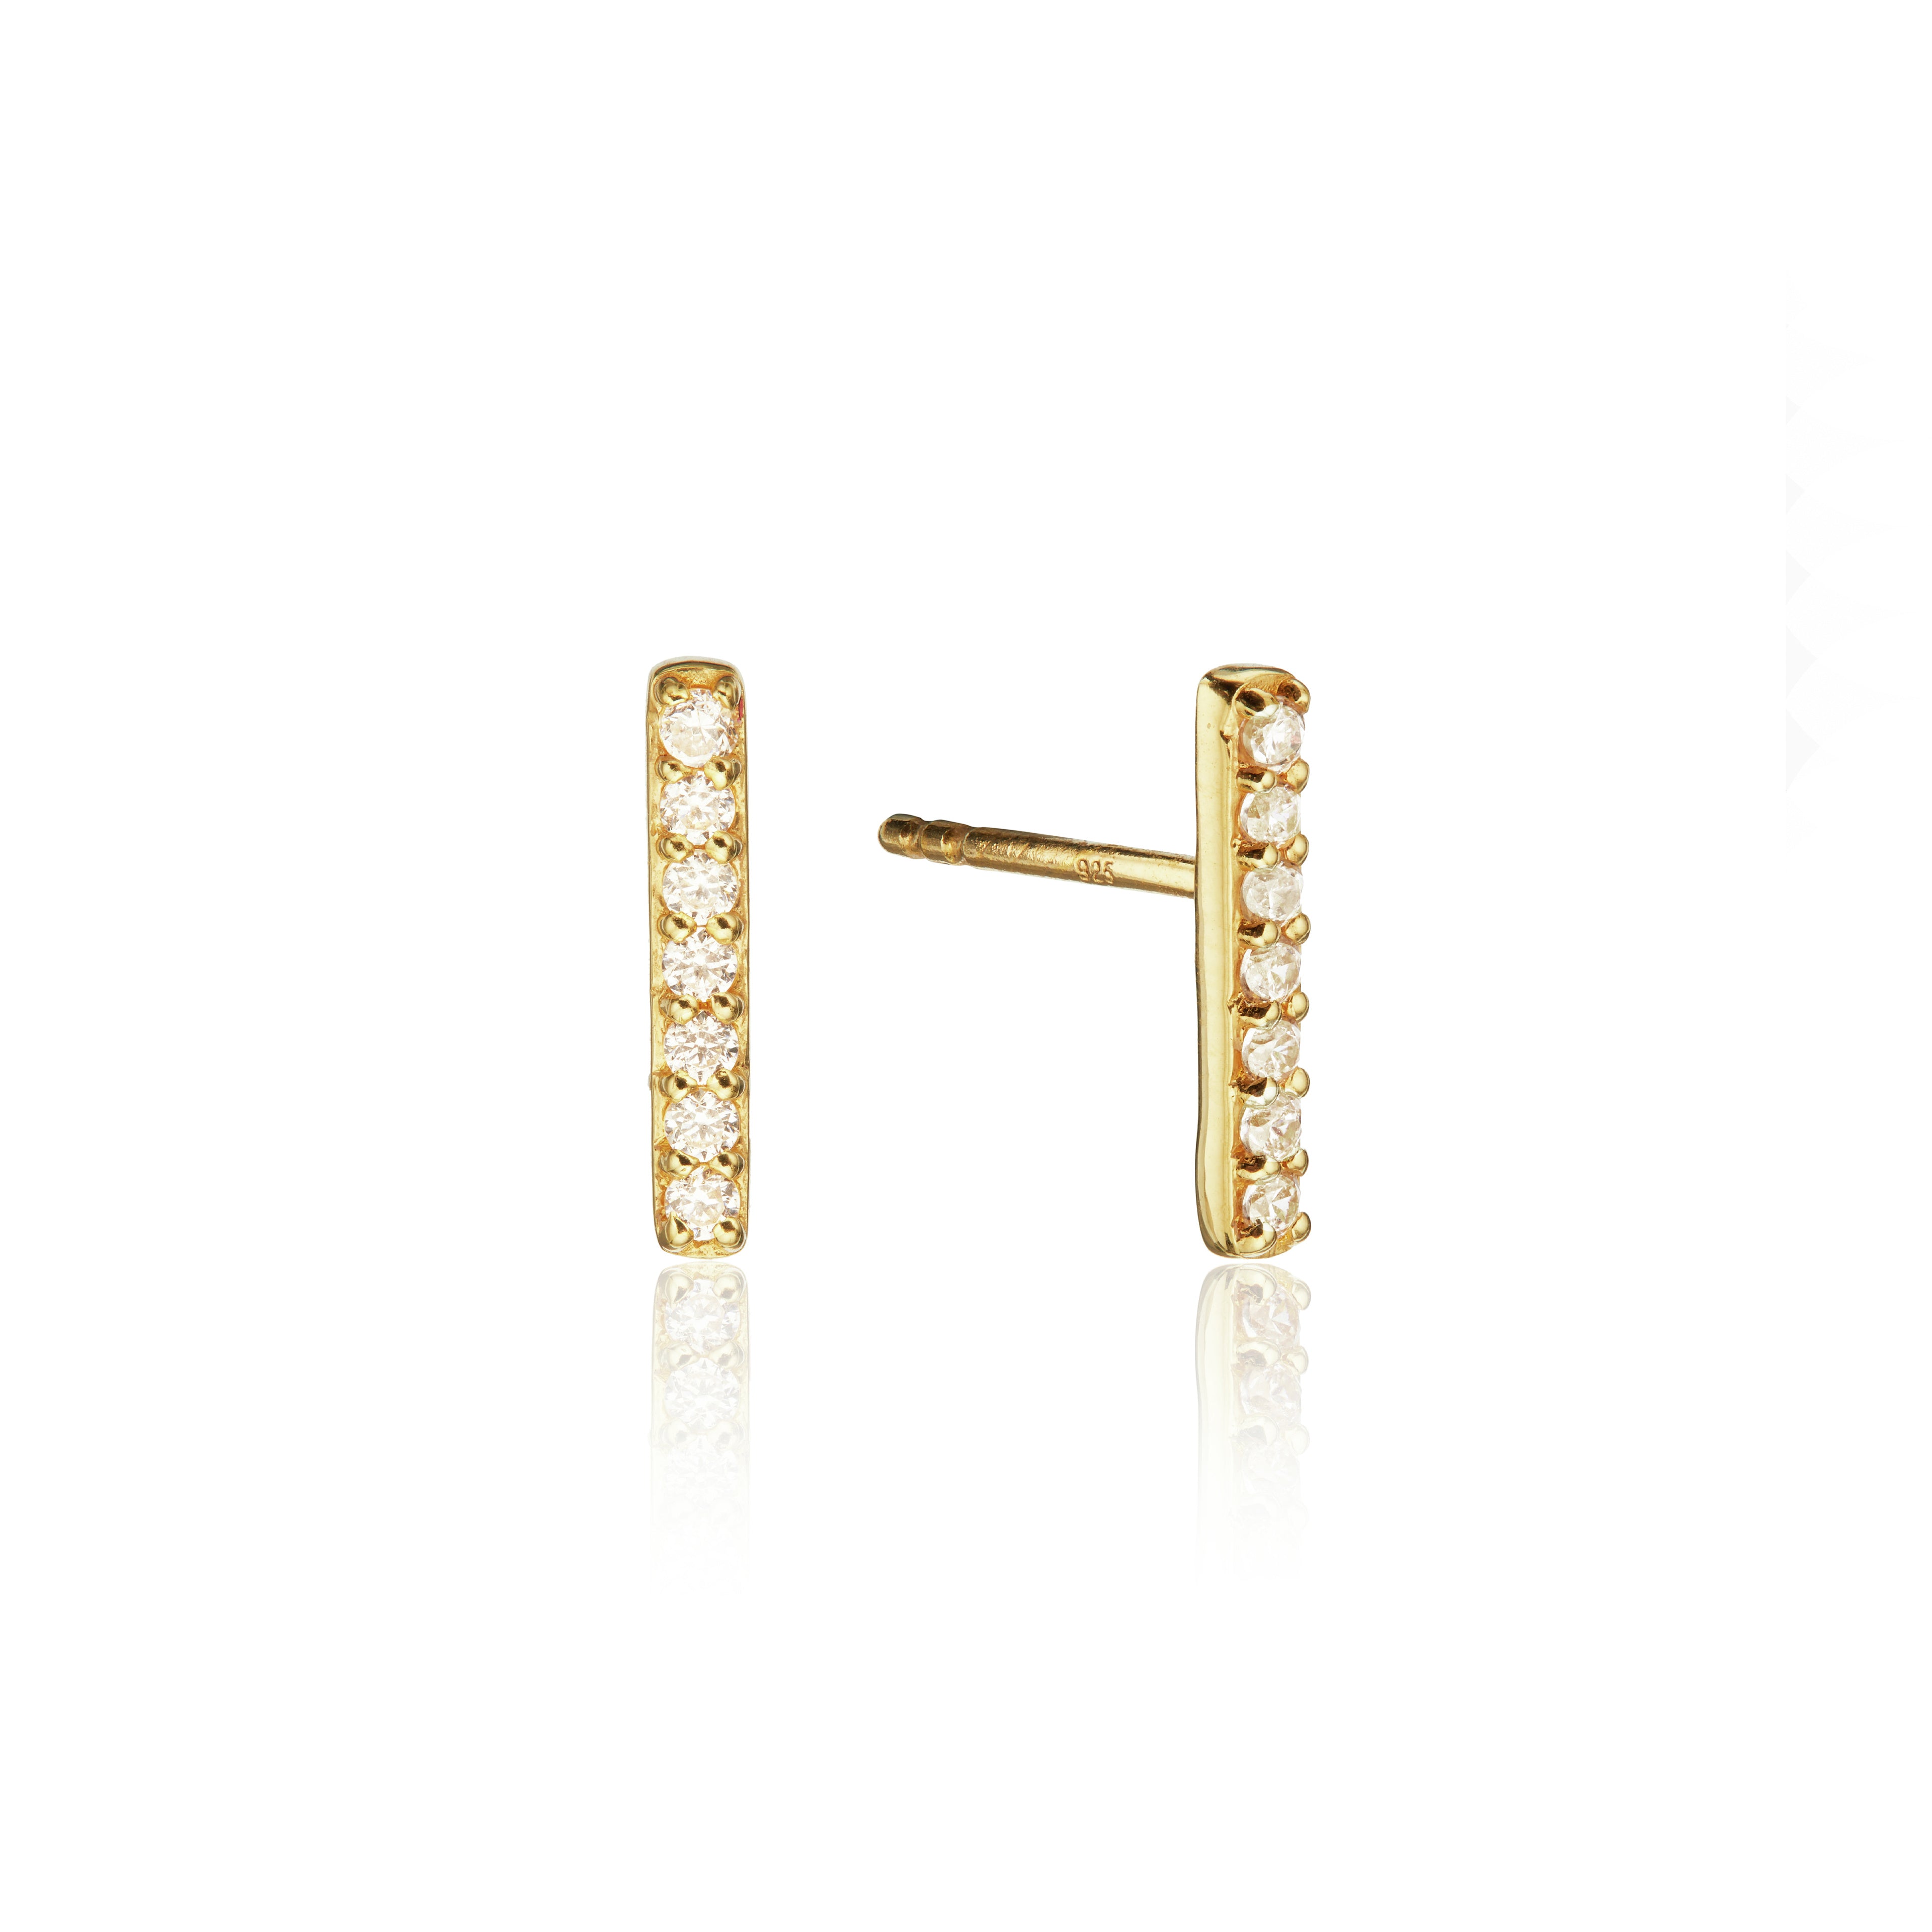 Gold diamond style bar stud earrings on a white background